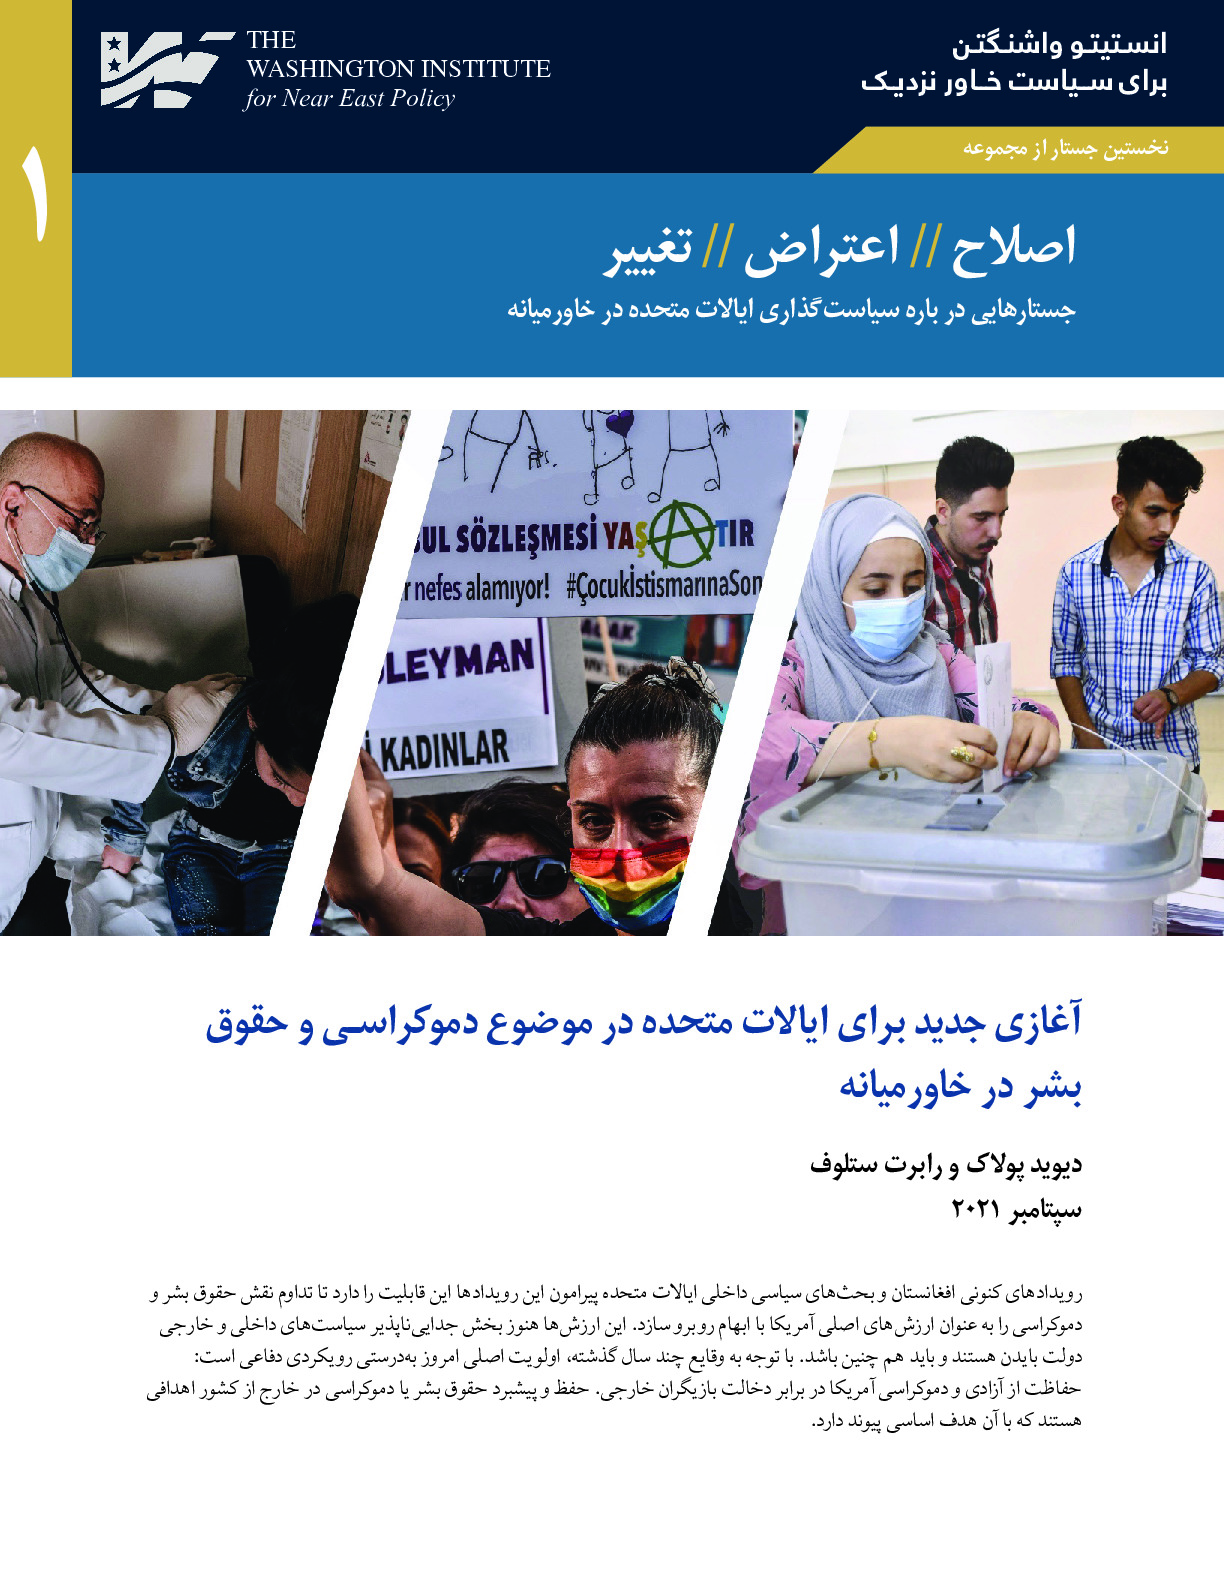 A New Start for the U.S. on Mideast Democracy and Human Rights - Persian version.pdf